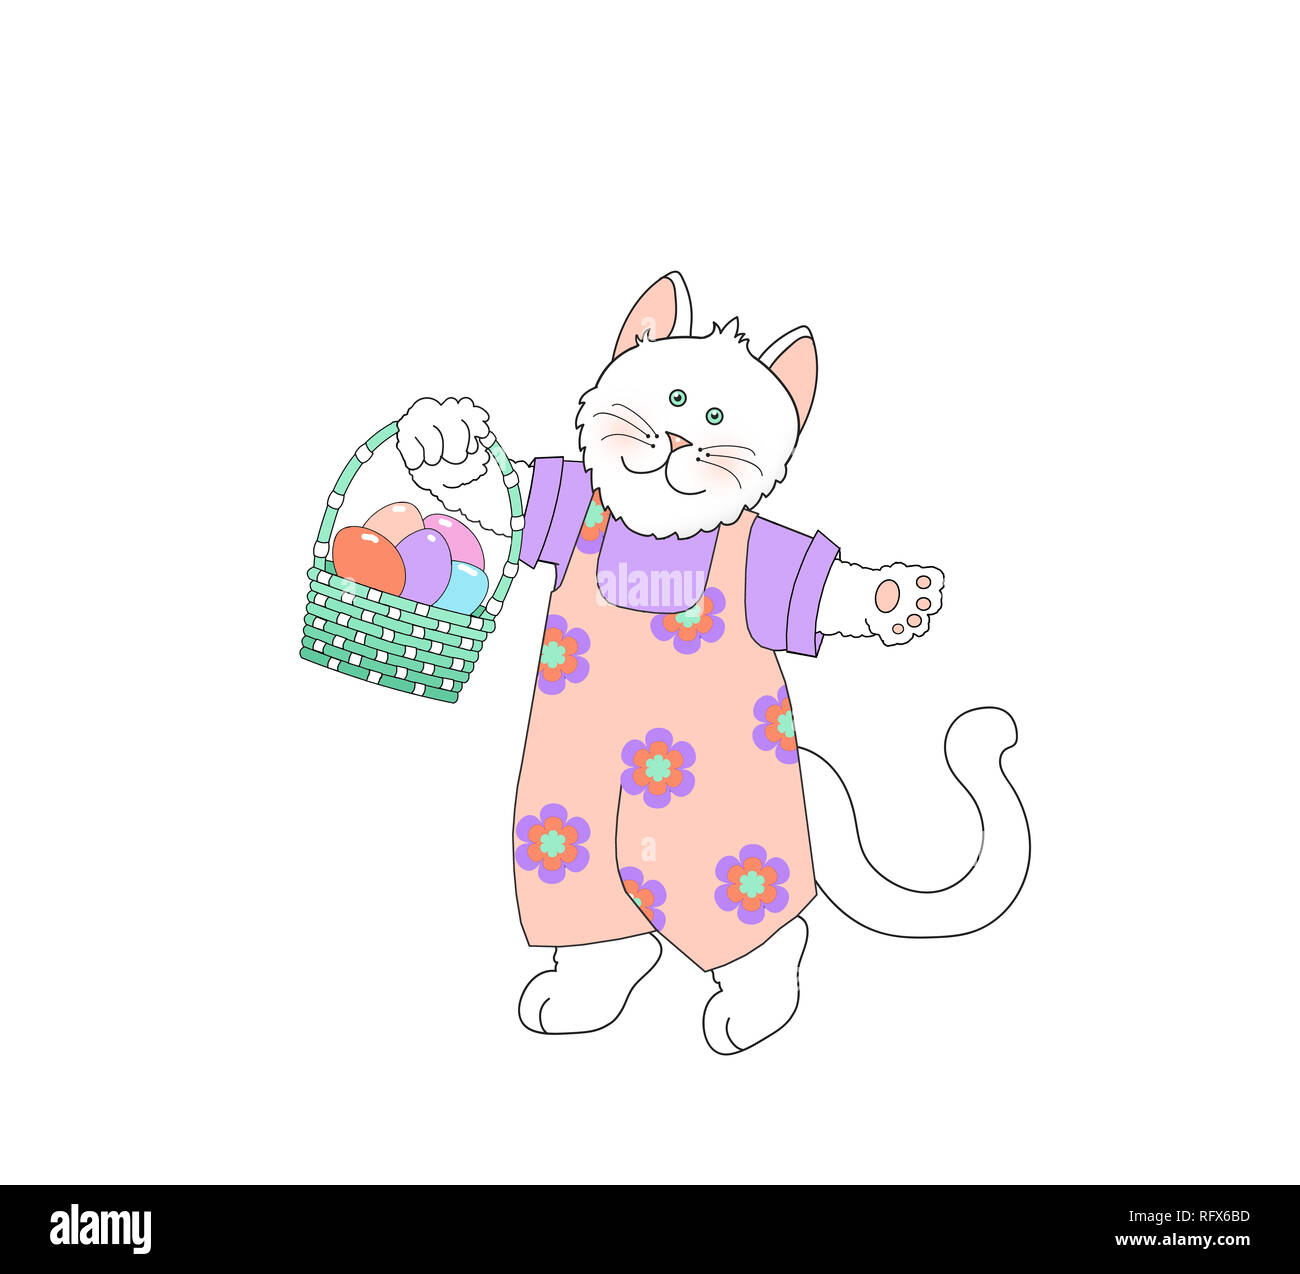 Illustration of a cute cat/kitten wearing clothes and carrying an Easter basket on a white background Stock Photo